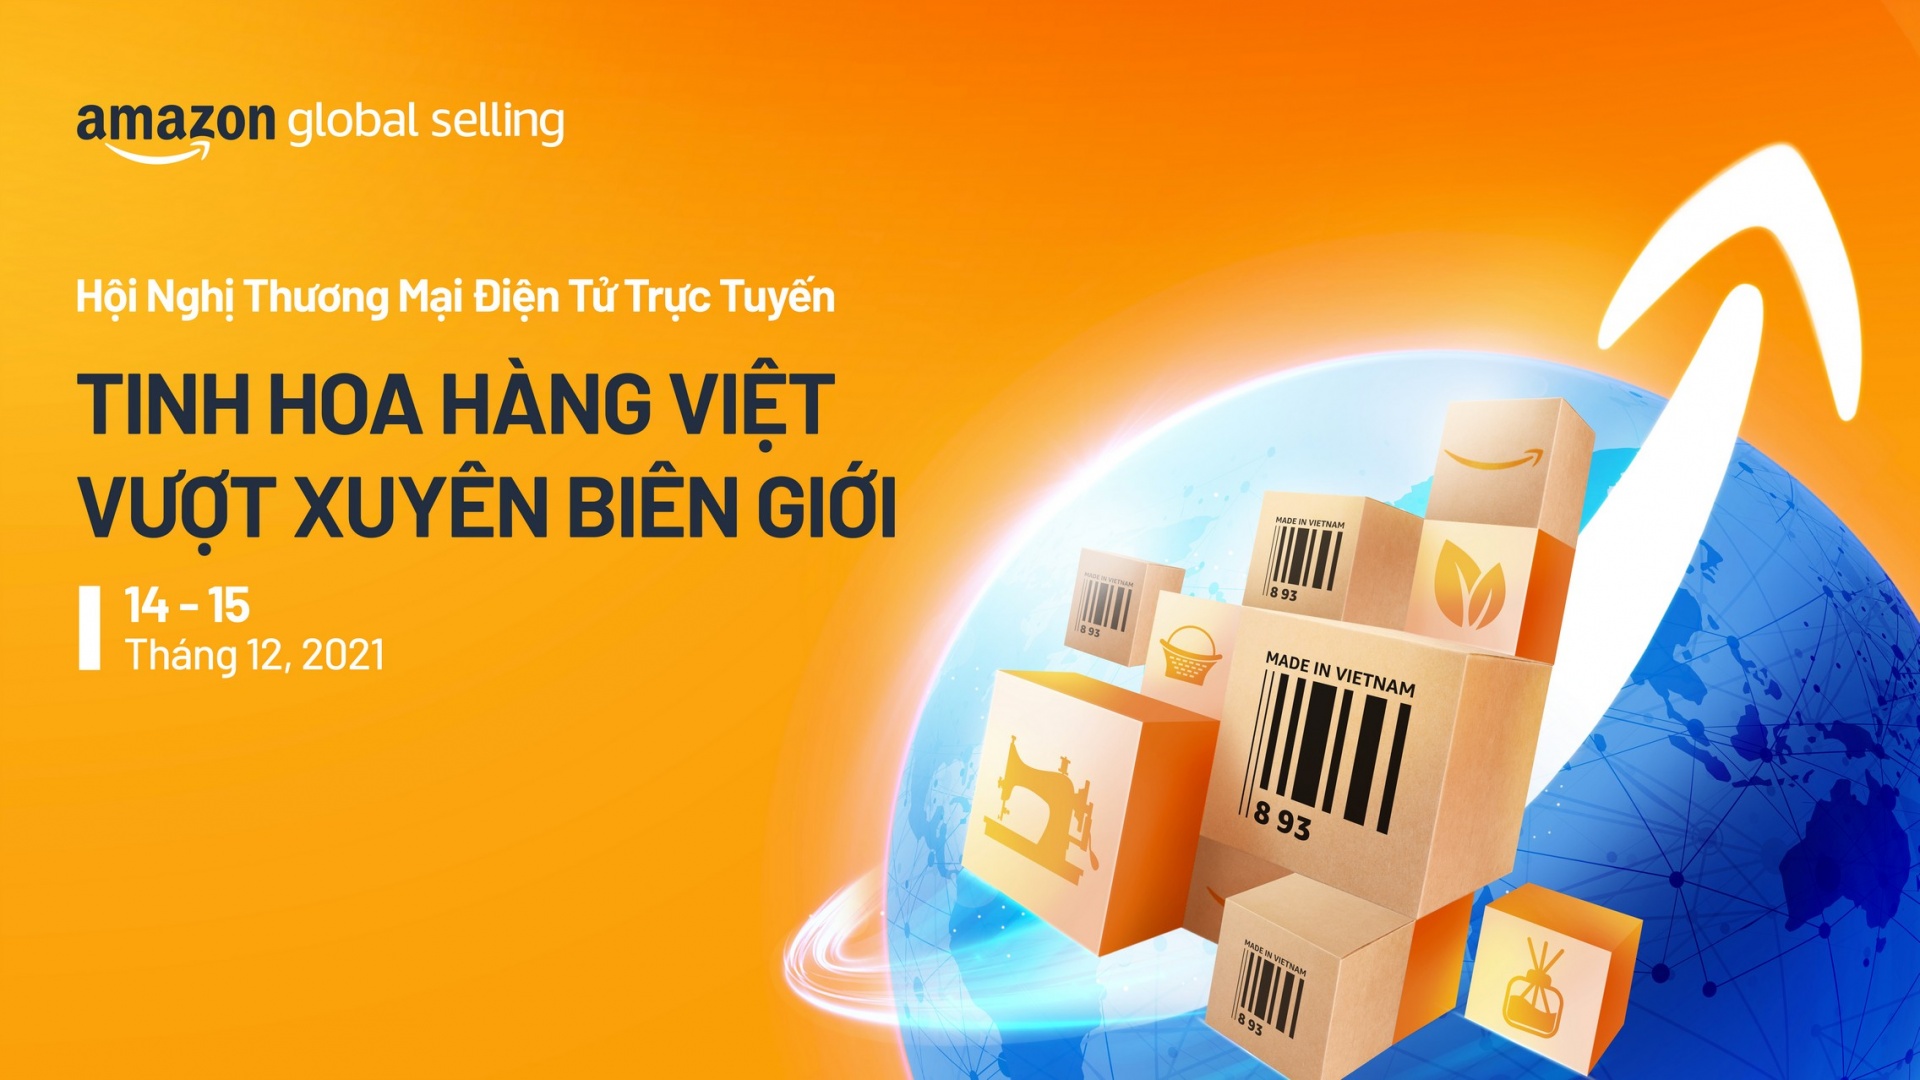 Amazon Global Selling partners with MoIT to help Vietnamese businesses reach the globe